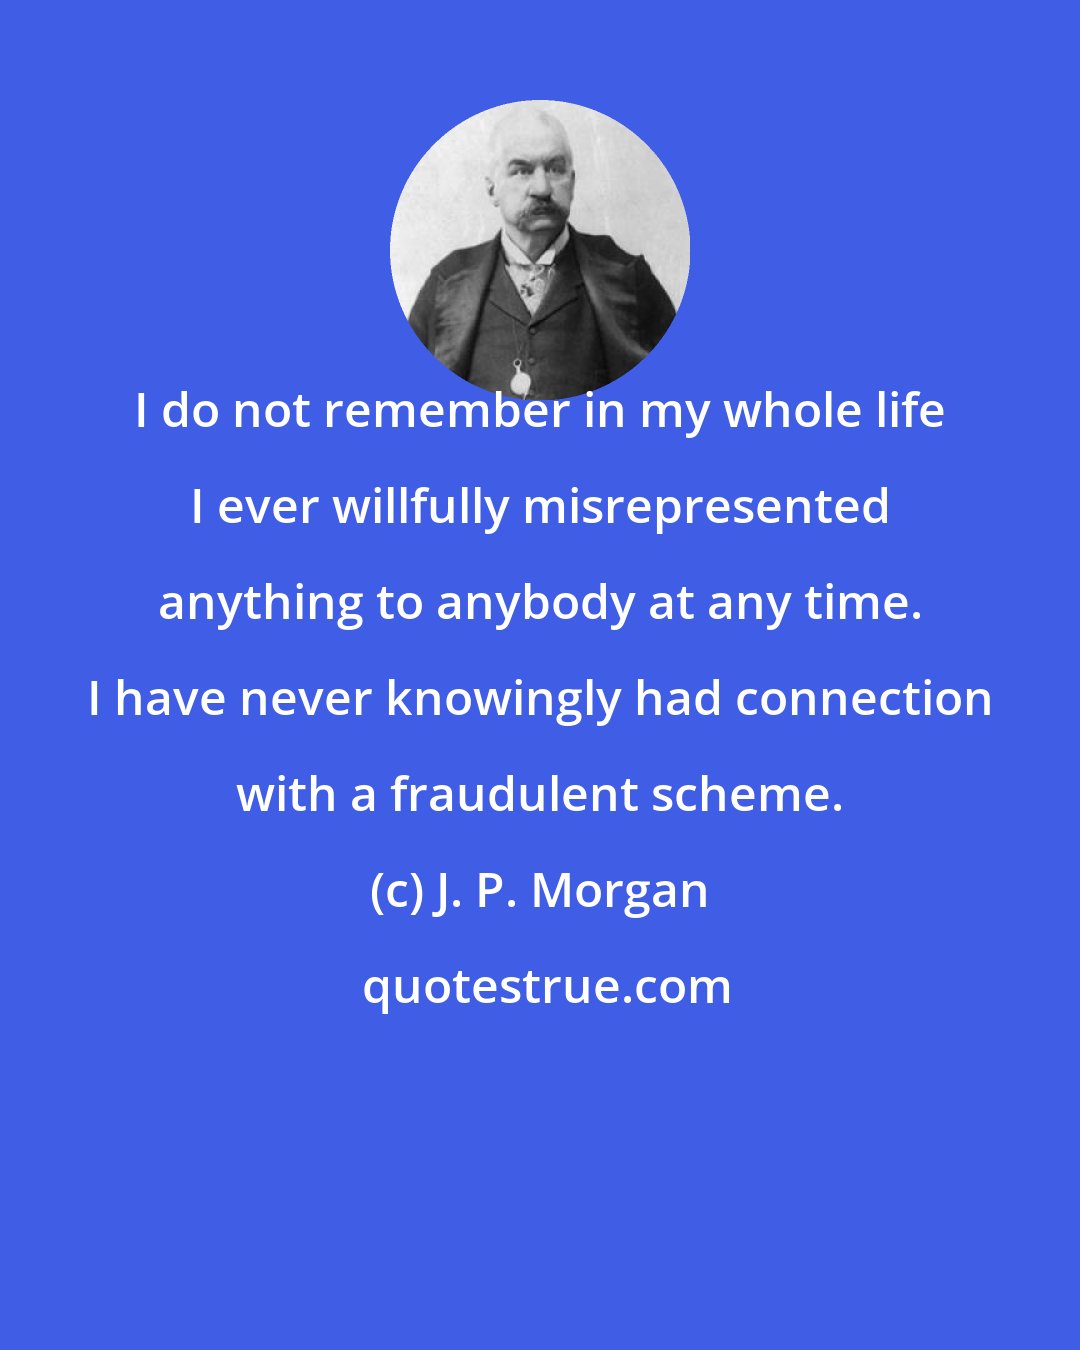 J. P. Morgan: I do not remember in my whole life I ever willfully misrepresented anything to anybody at any time. I have never knowingly had connection with a fraudulent scheme.